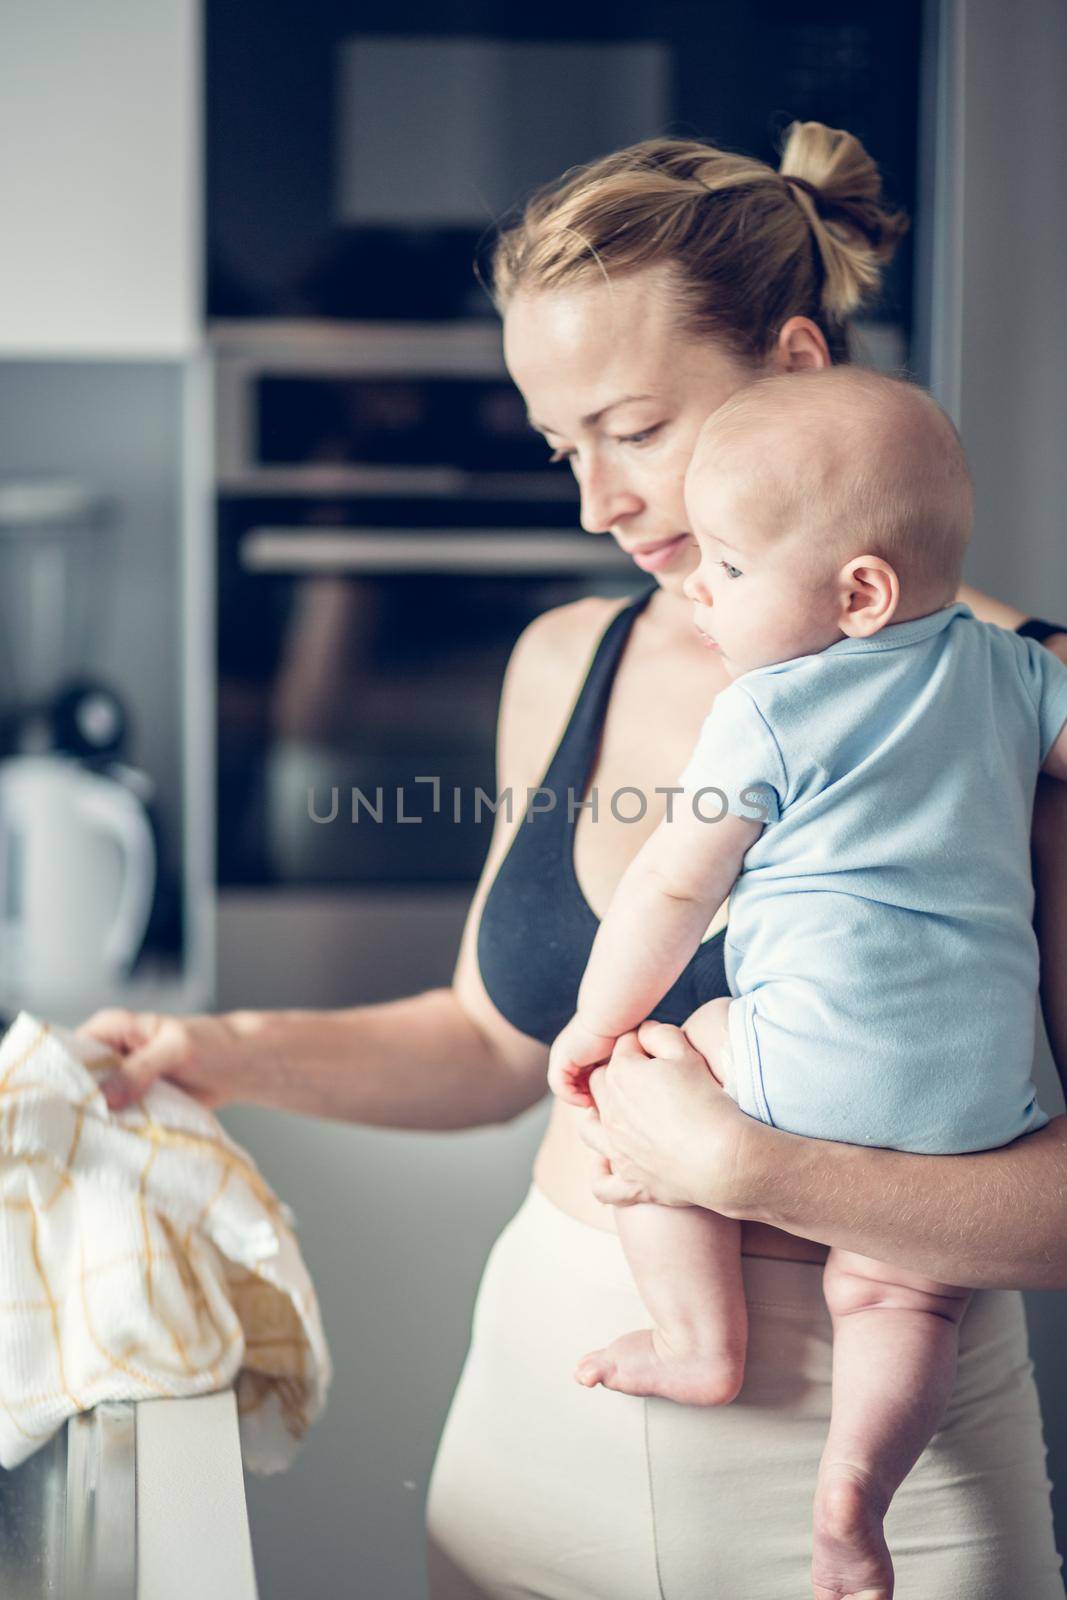 Woman wiping kitchen sink with a cloth after finishing washing the dishes while holding four months old baby boy in her hands.